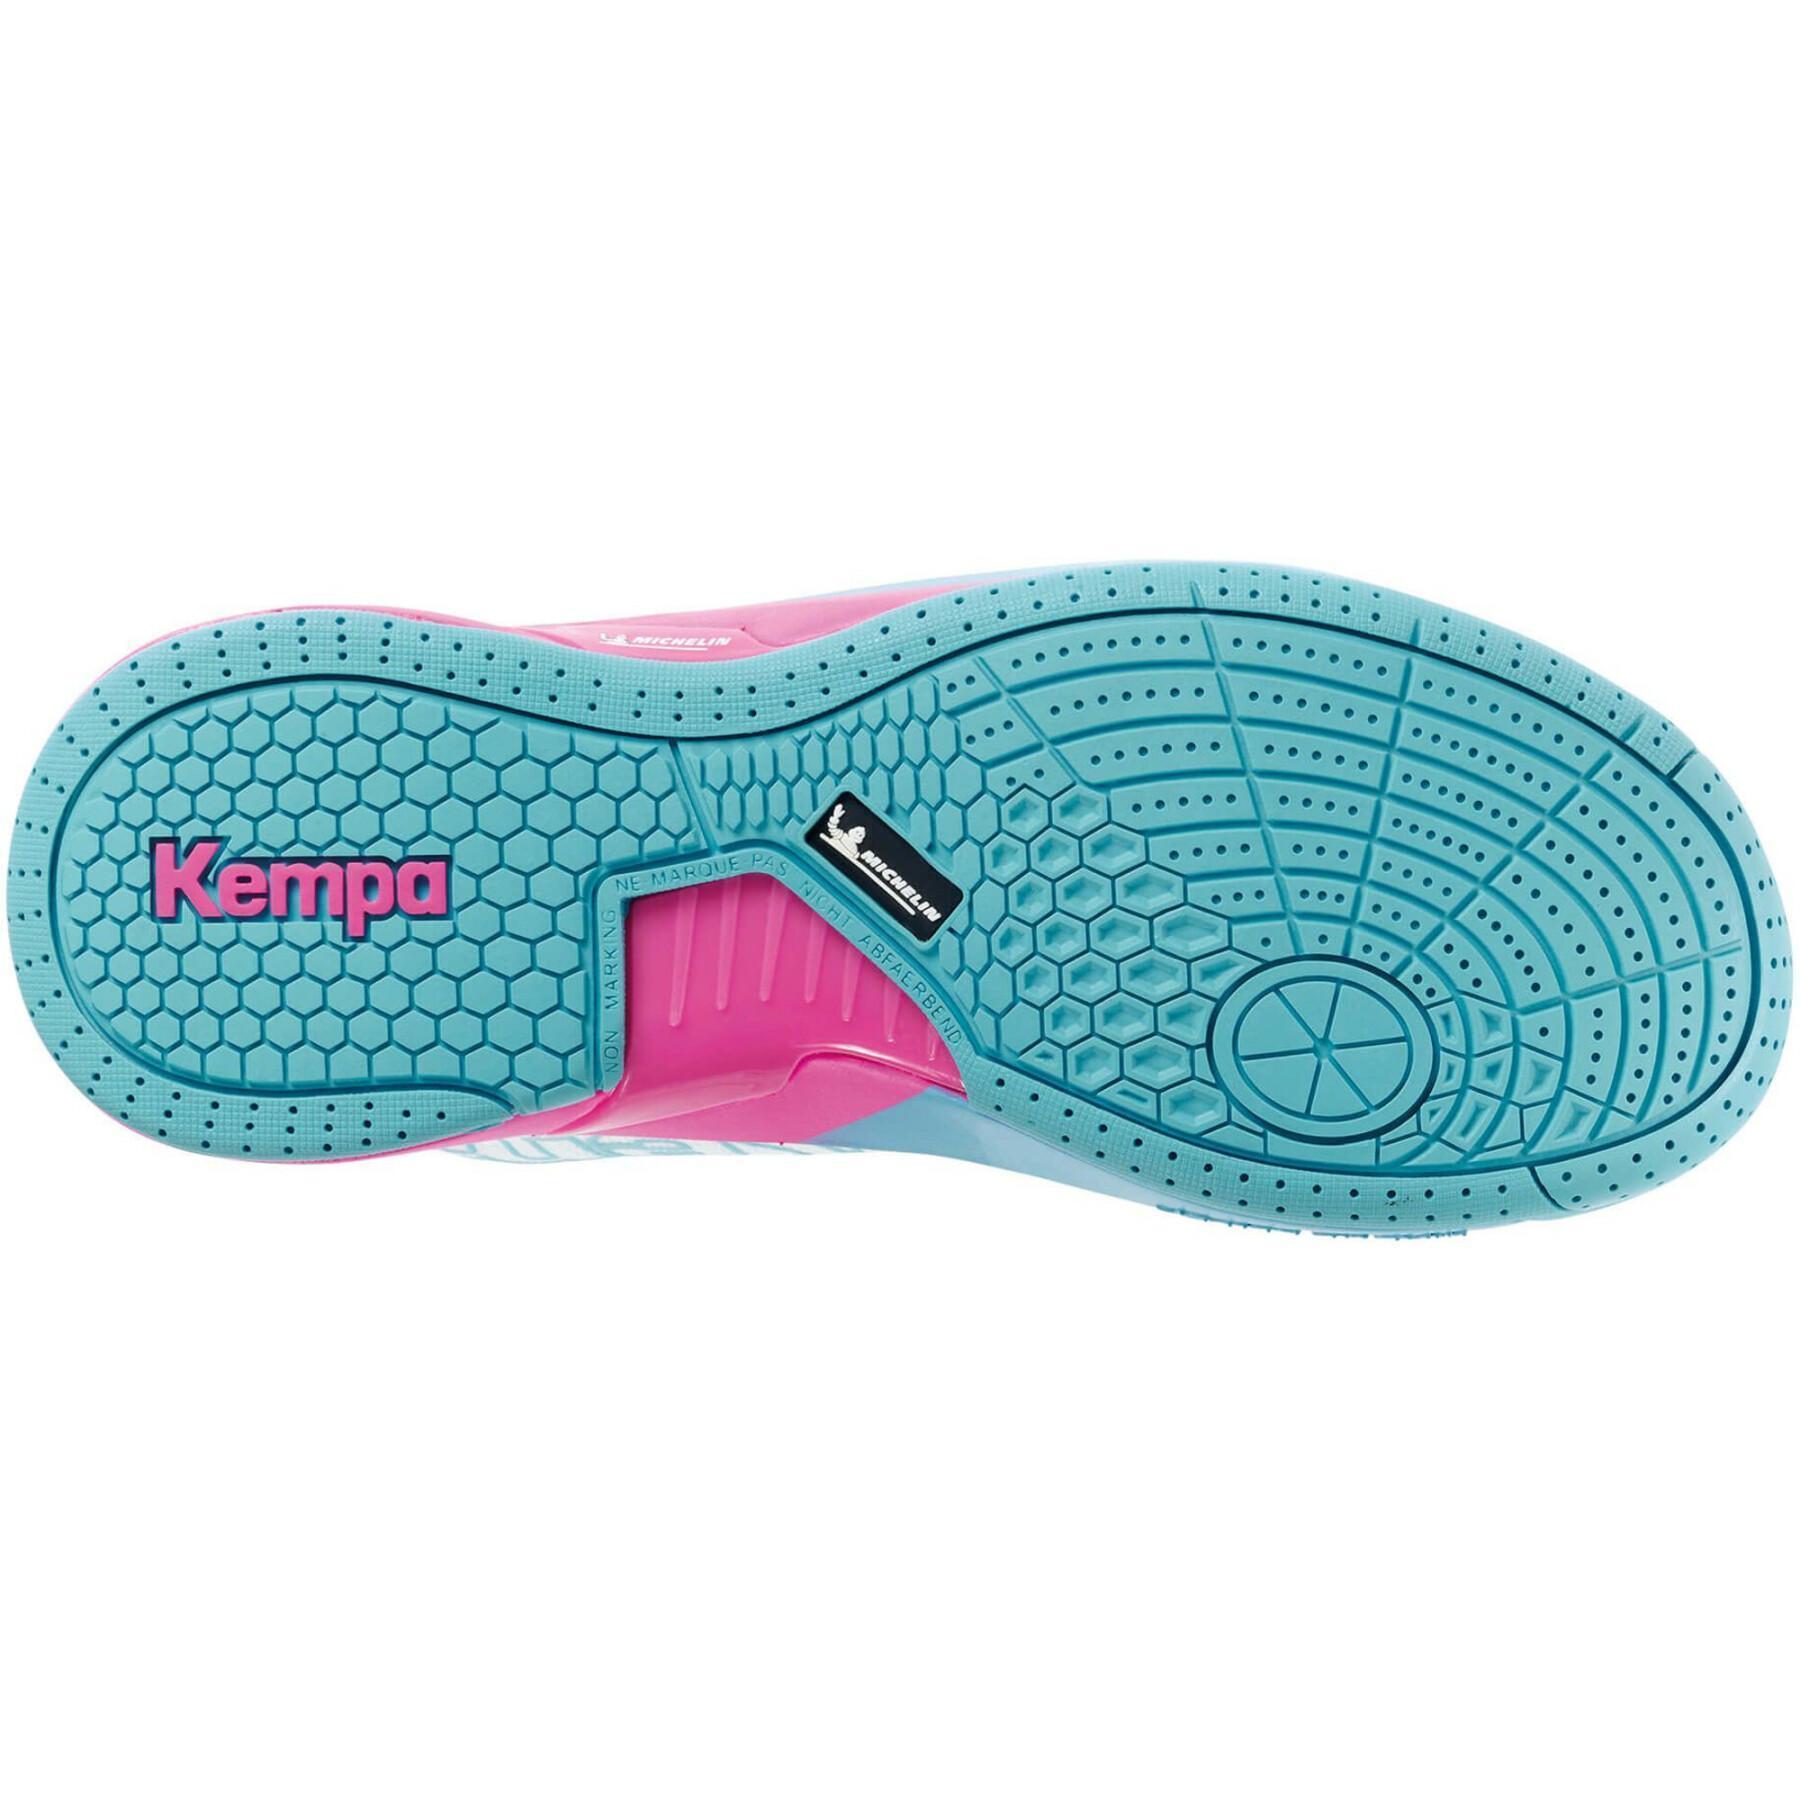 Chaussures femme Kempa Attack Pro 2.0